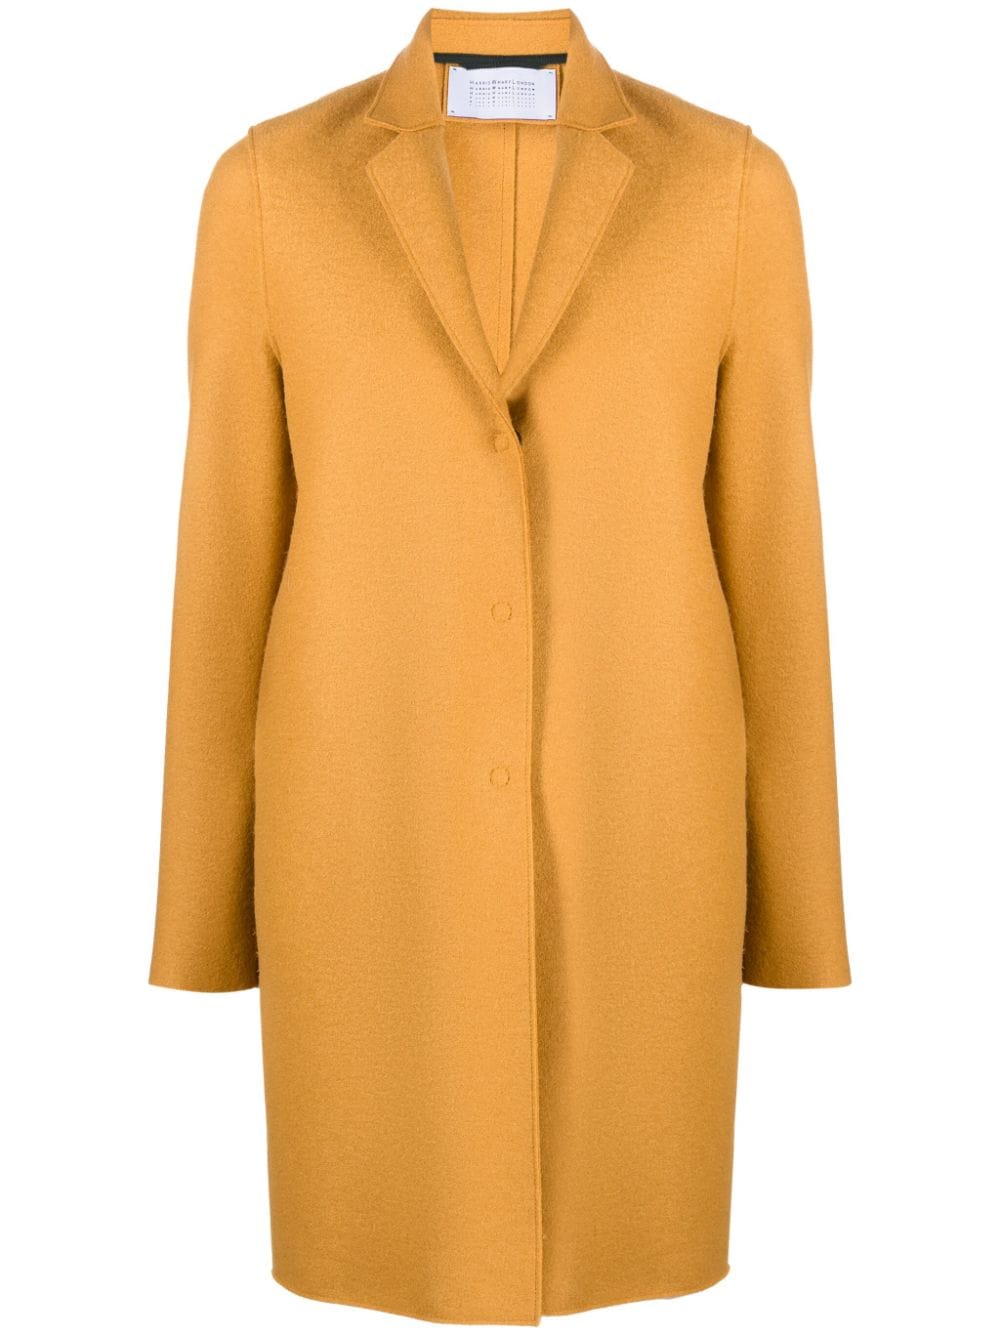 Cocoon single-breasted wool coat